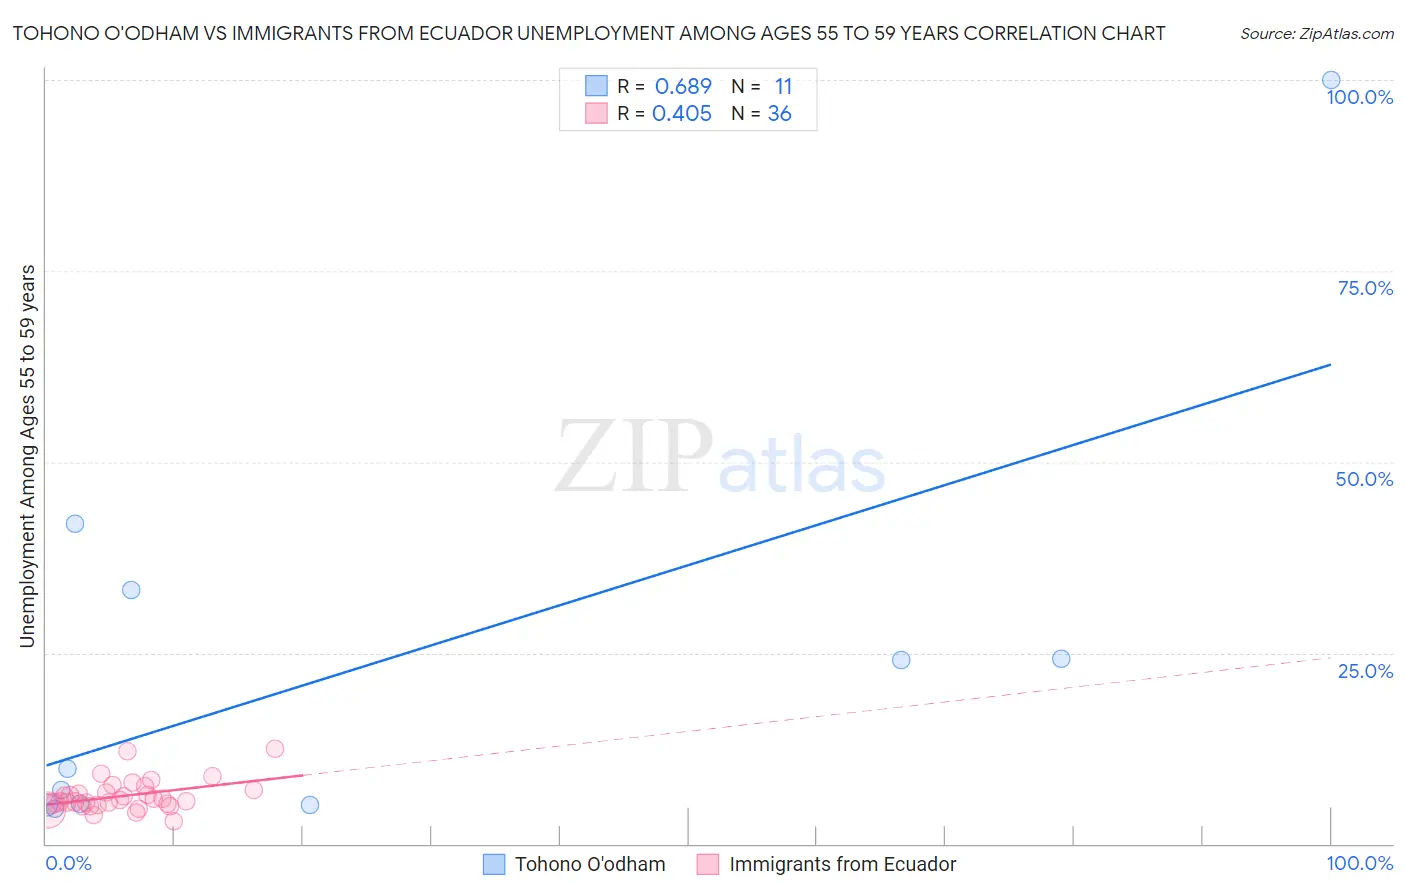 Tohono O'odham vs Immigrants from Ecuador Unemployment Among Ages 55 to 59 years